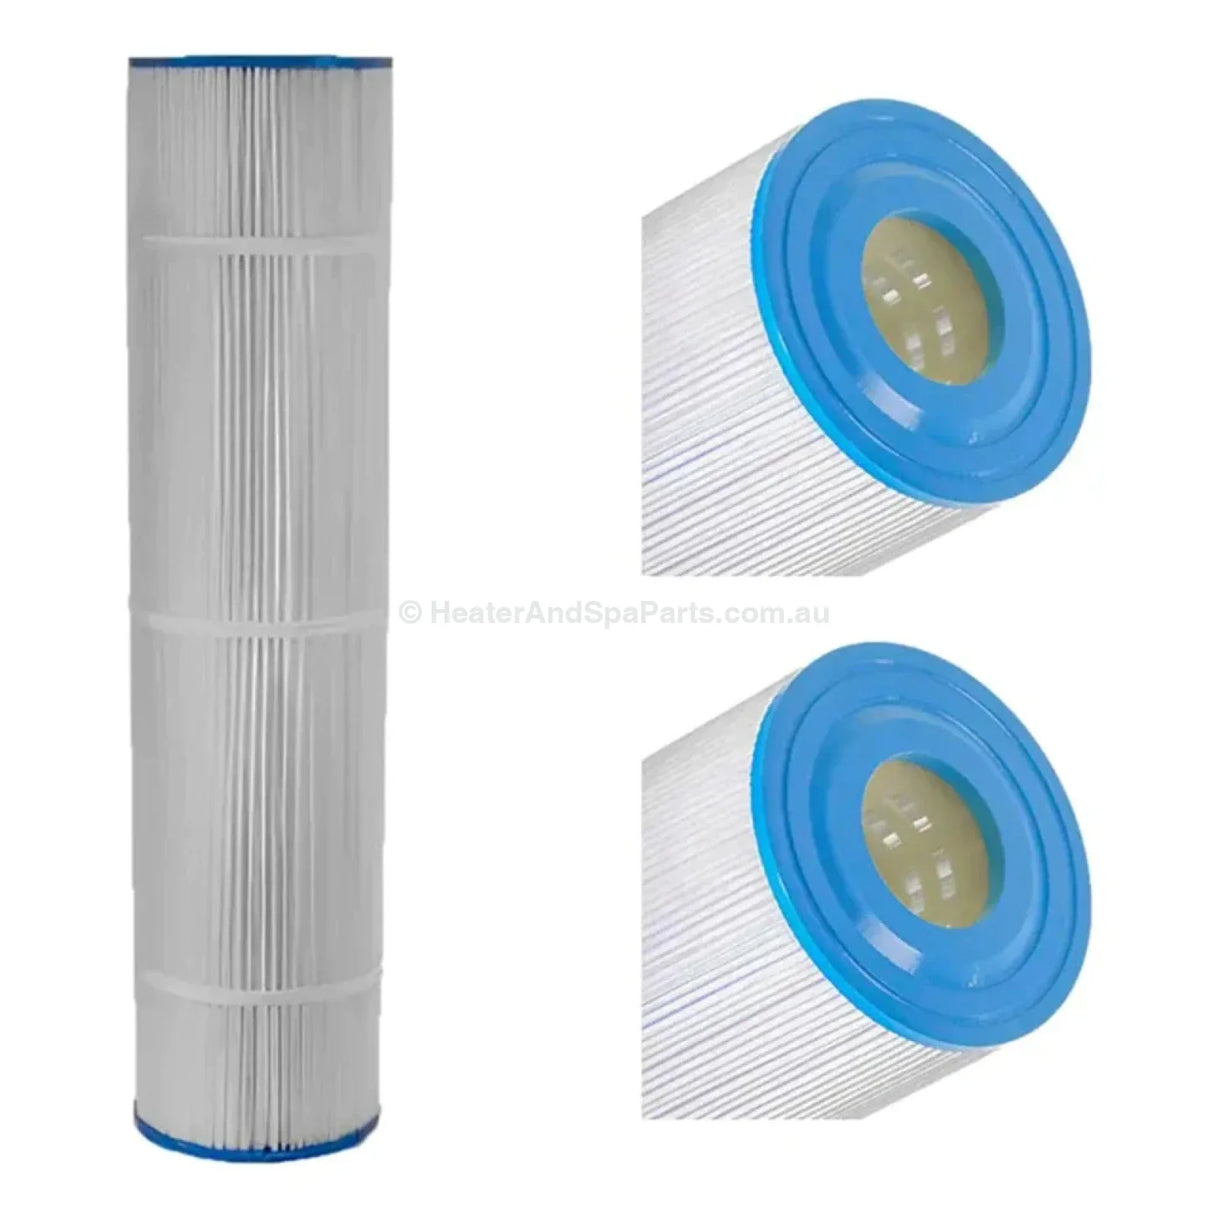 750Mm X 185Mm Waterco Trimline - Cc100 Replacement Filter Cartridge Filters